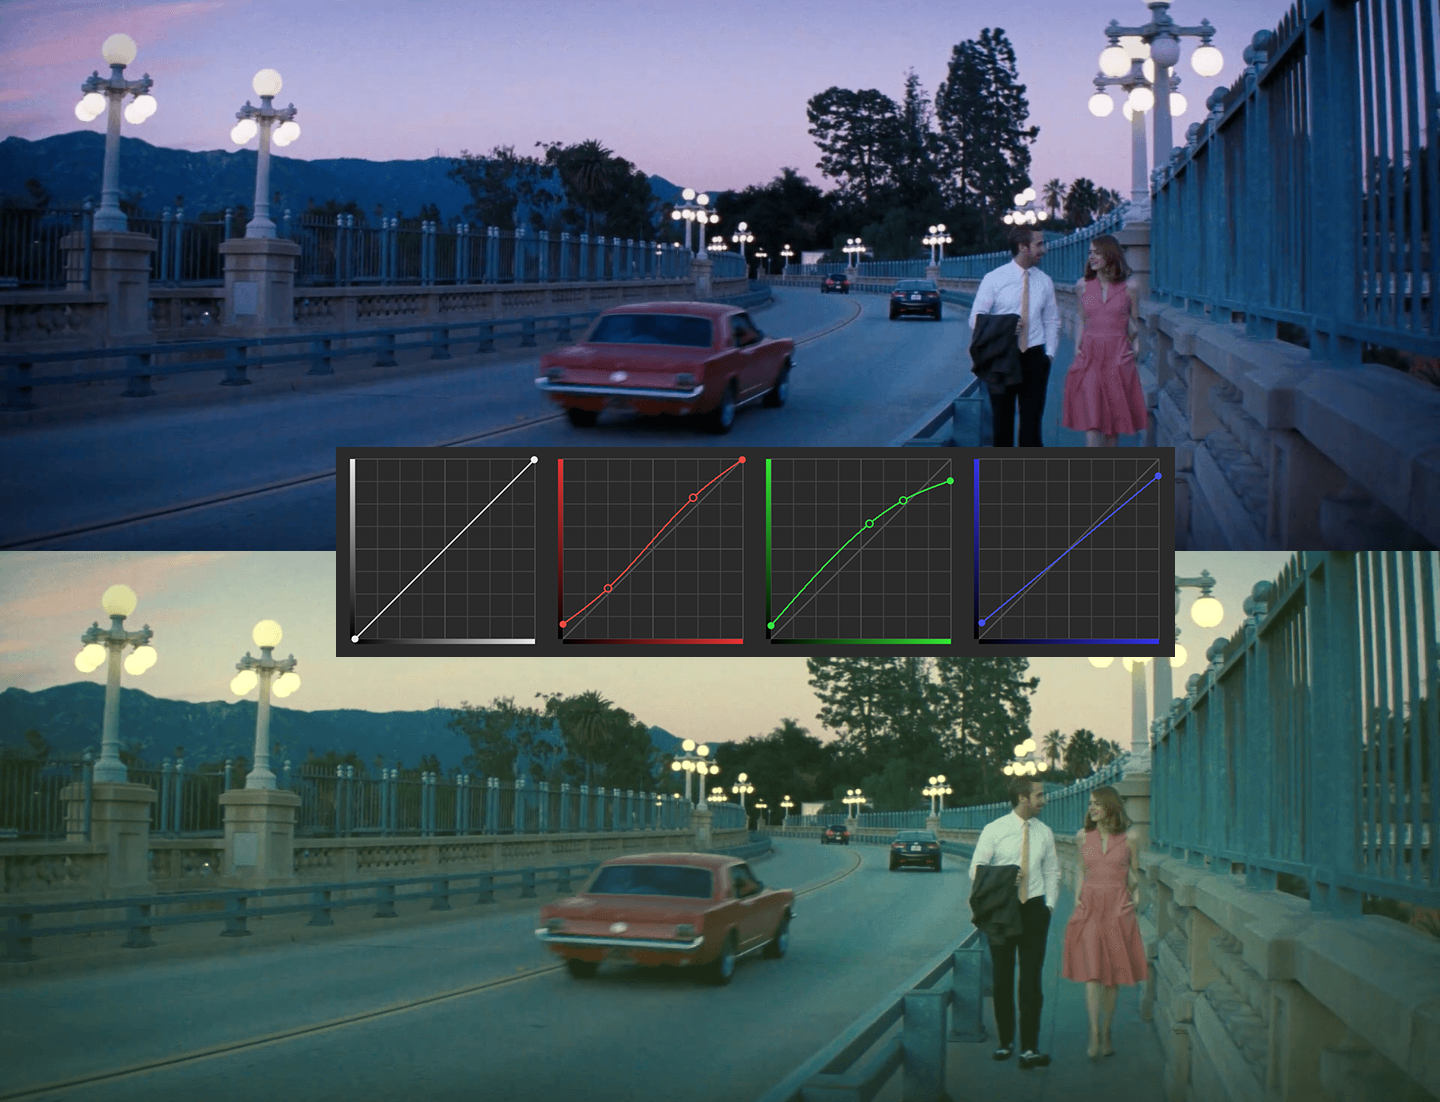 How to Match a Film Look with Basic Color Correction Tools